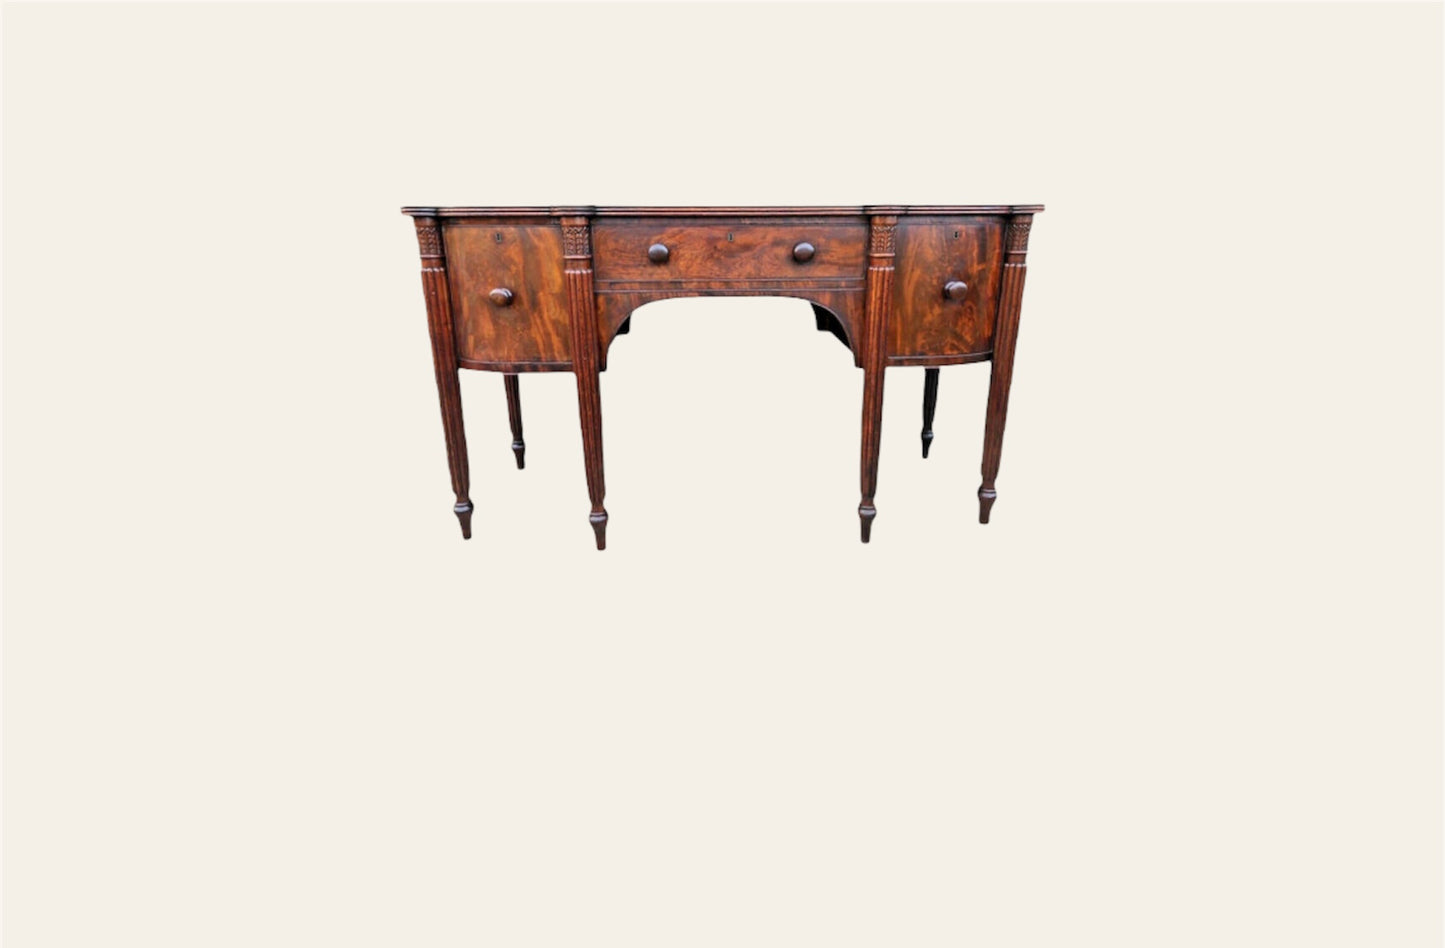 029.....Magnificent William IV Flame Mahogany Sideboard ( sold )